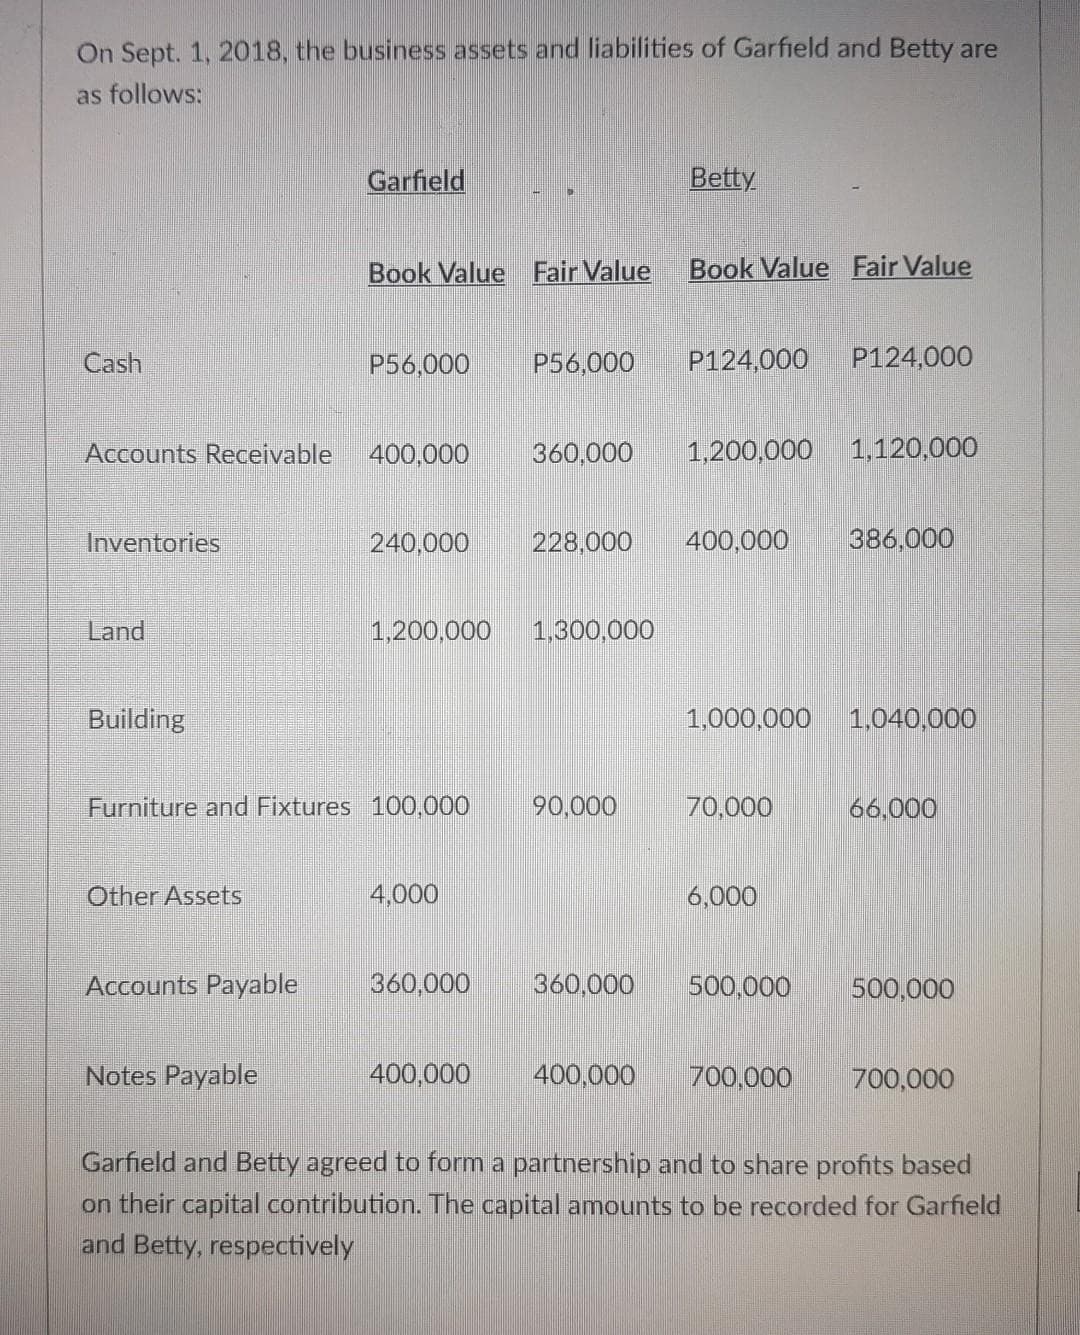 On Sept. 1, 2018, the business assets and liabilities of Garfield and Betty are
as follows:
Garfield
Betty
Book Value Fair Value
Book Value Fair Value
Cash
P56,000
P56,000
P124,000
P124,000
Accounts Receivable
400,000
360,000
1,200,000
1,120,000
Inventories
240,000
228,000
400,000
386,000
Land
1,200,000
1,300,000
Building
1,000,000
1.040,000
Furniture and Fixtures 100,000
90,000
70,000
66,000
Other Assets
4,000
6,000
Accounts Payable
360,000
360,000
500,000
500,000
Notes Payable
400,000
400,000
700,000
700,000
Garfield and Betty agreed to form a partnership and to share profits based
on their capital contribution. The capital amounts to be recorded for Garfield
and Betty, respectively
